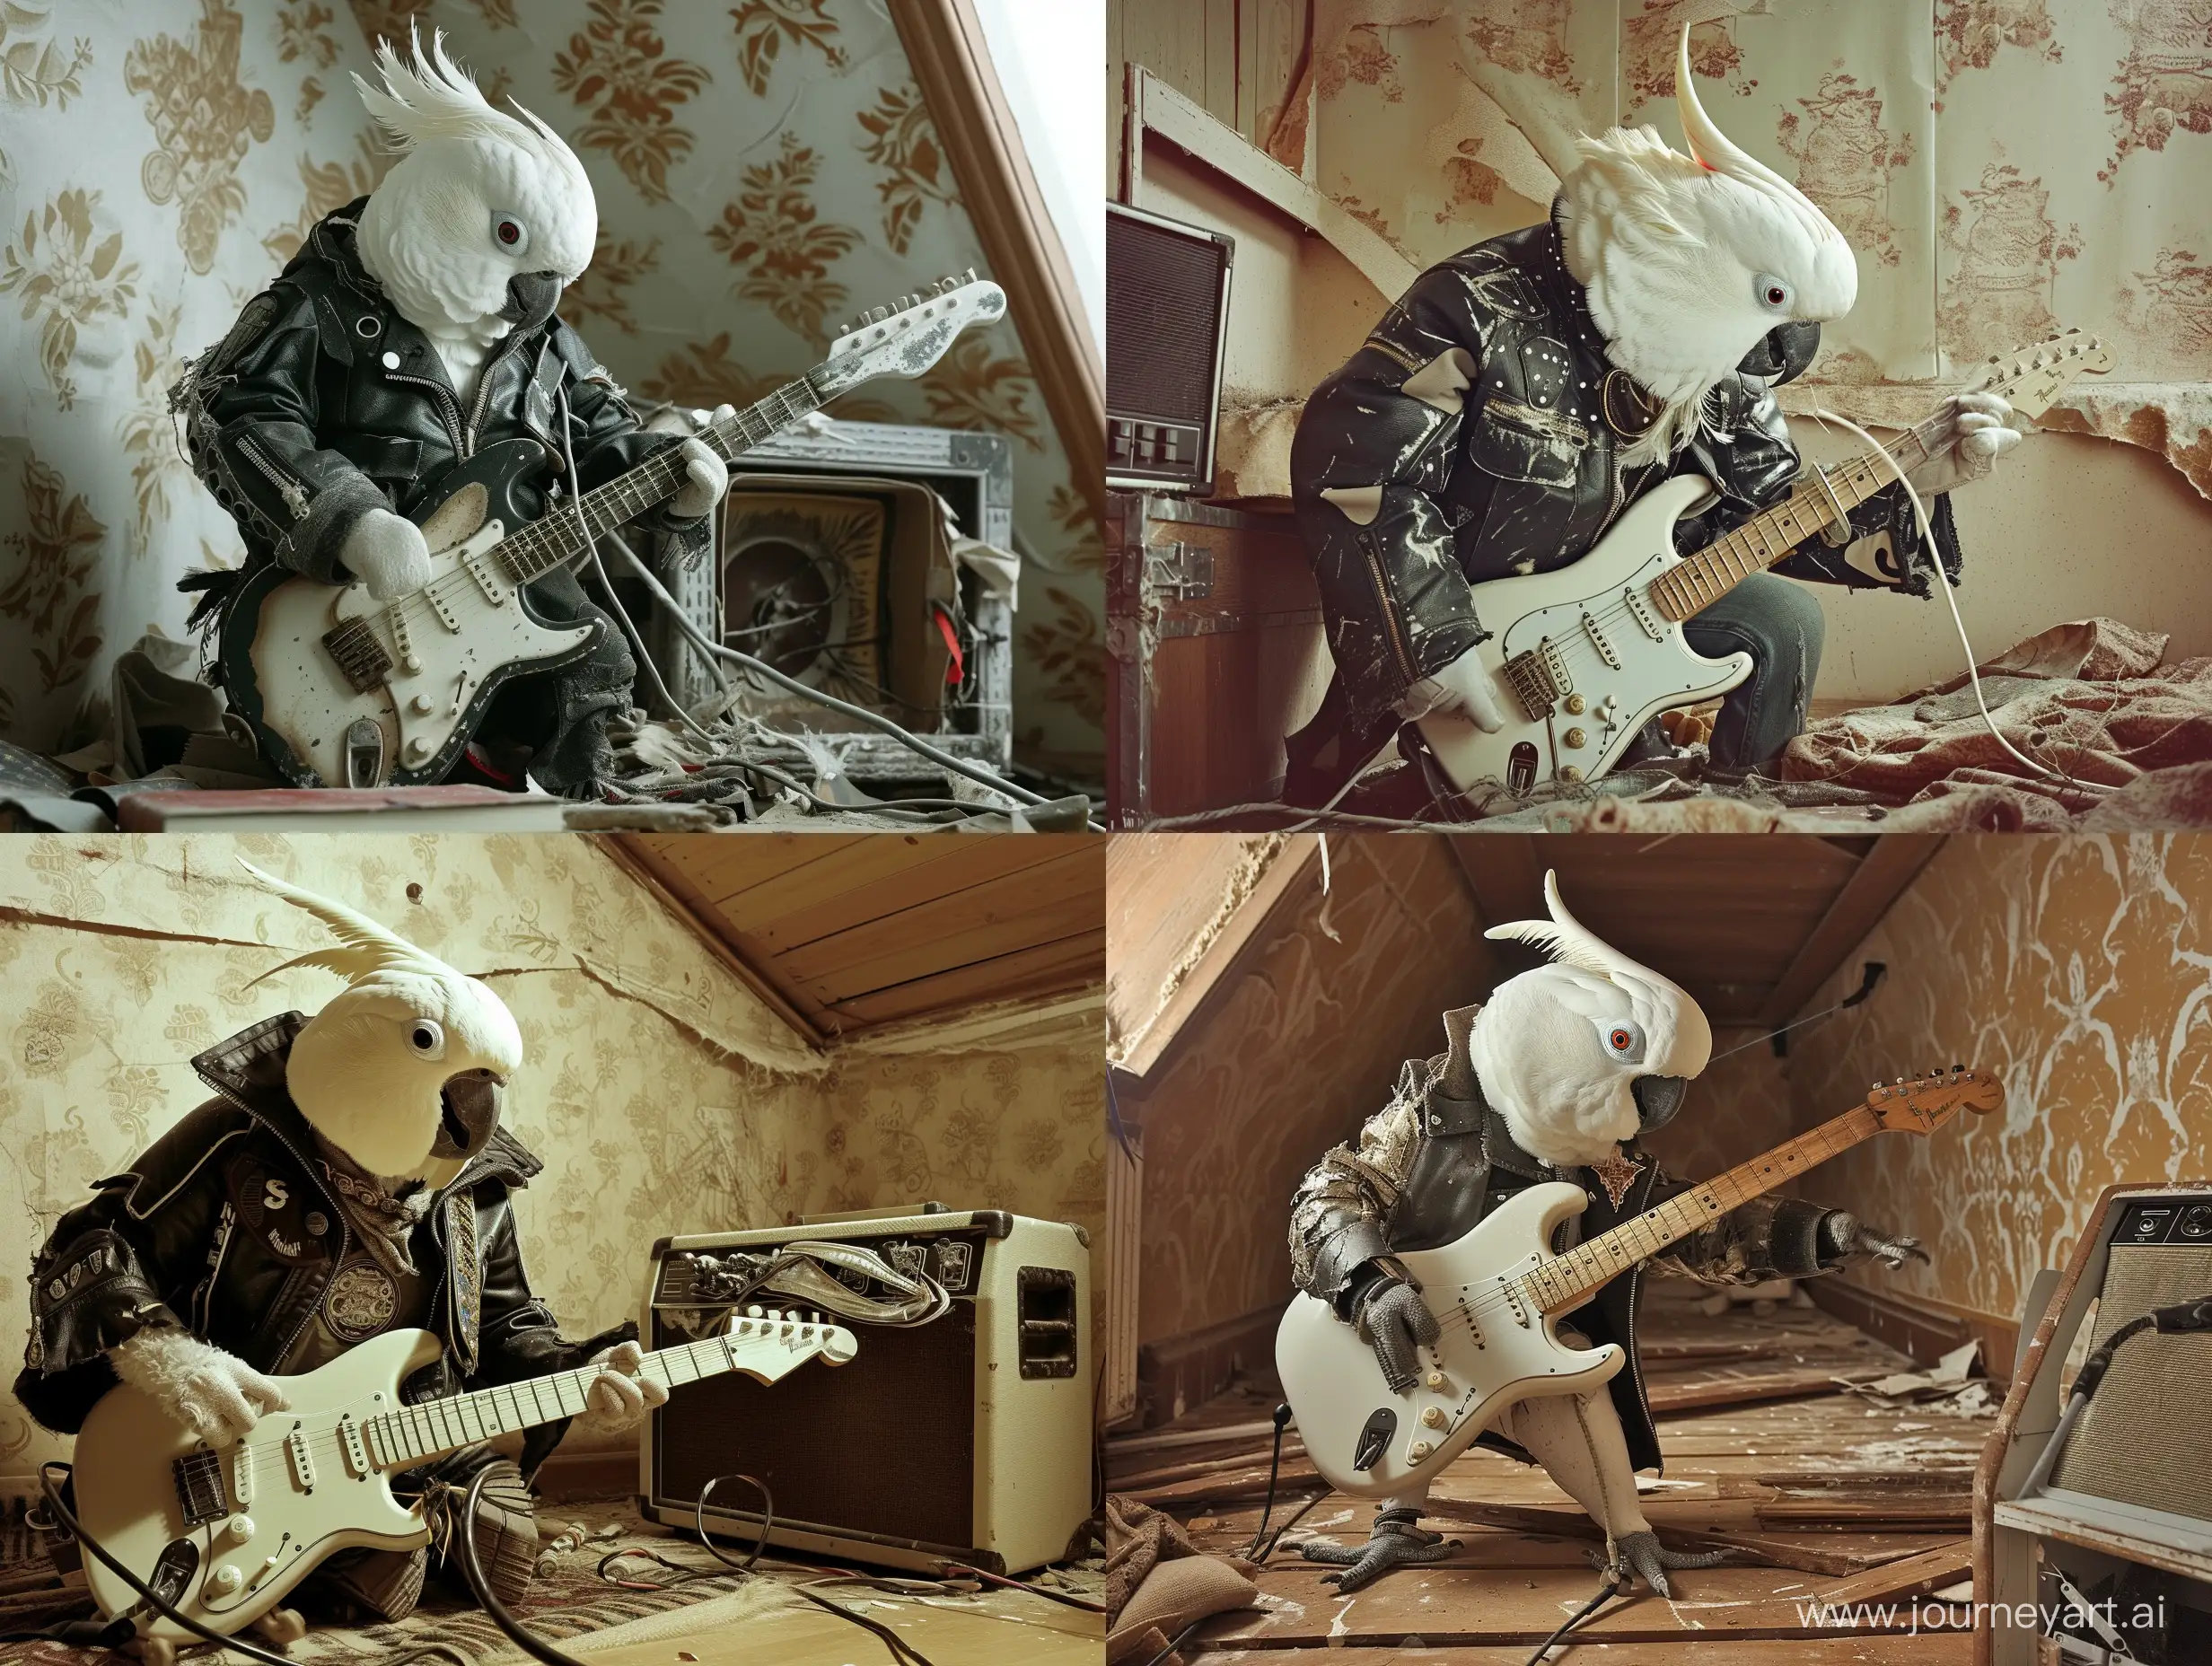 Creative and non-standard advertising, good detail, commercial photography, funny, in this advertisement a white parrot dressed up in a biker jacket locked himself in the attic and plays an electric guitar, funny advertising, the parrot was electrocuted by an electric guitar pathamushta he accidentally stepped on a wire that came from a speaker where an electric guitar was connected. The parrot's eyes were filled with anger, the room was a mess, the wallpaper on the walls had fallen off